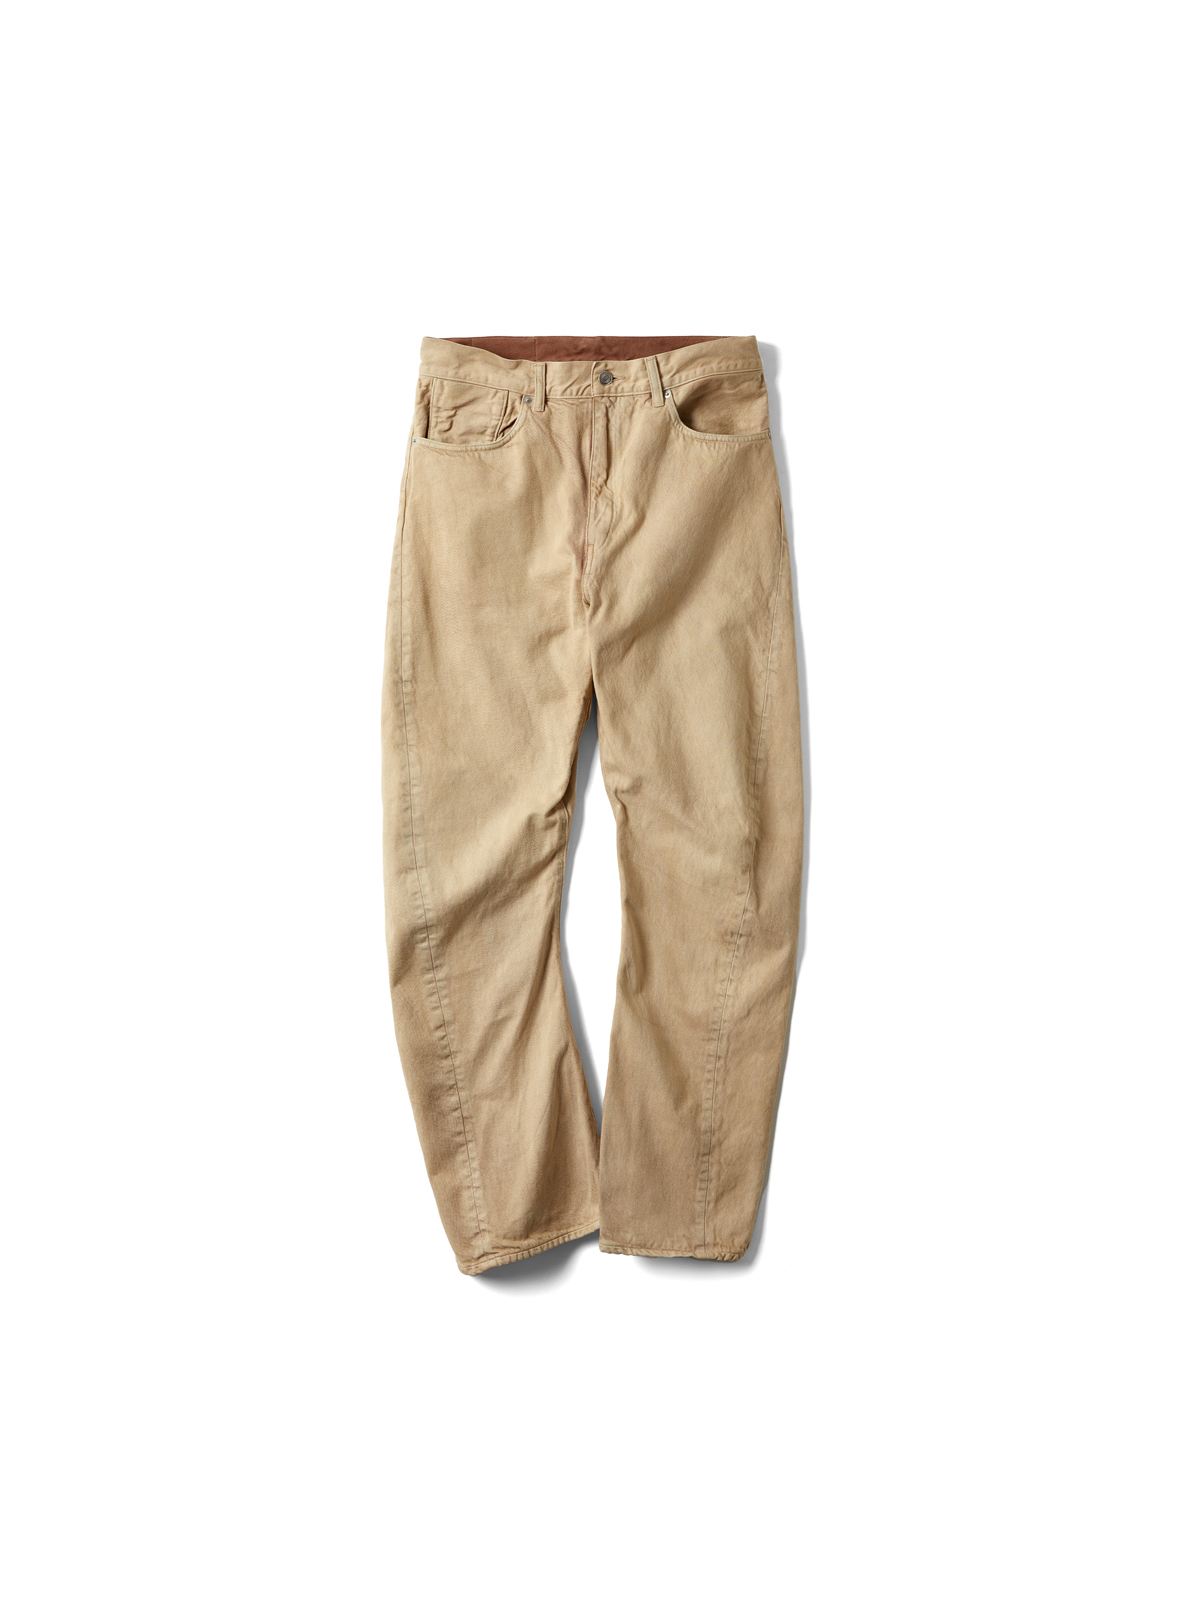 OVERDYED 3D TROUSERS (YELLOW BROWN)